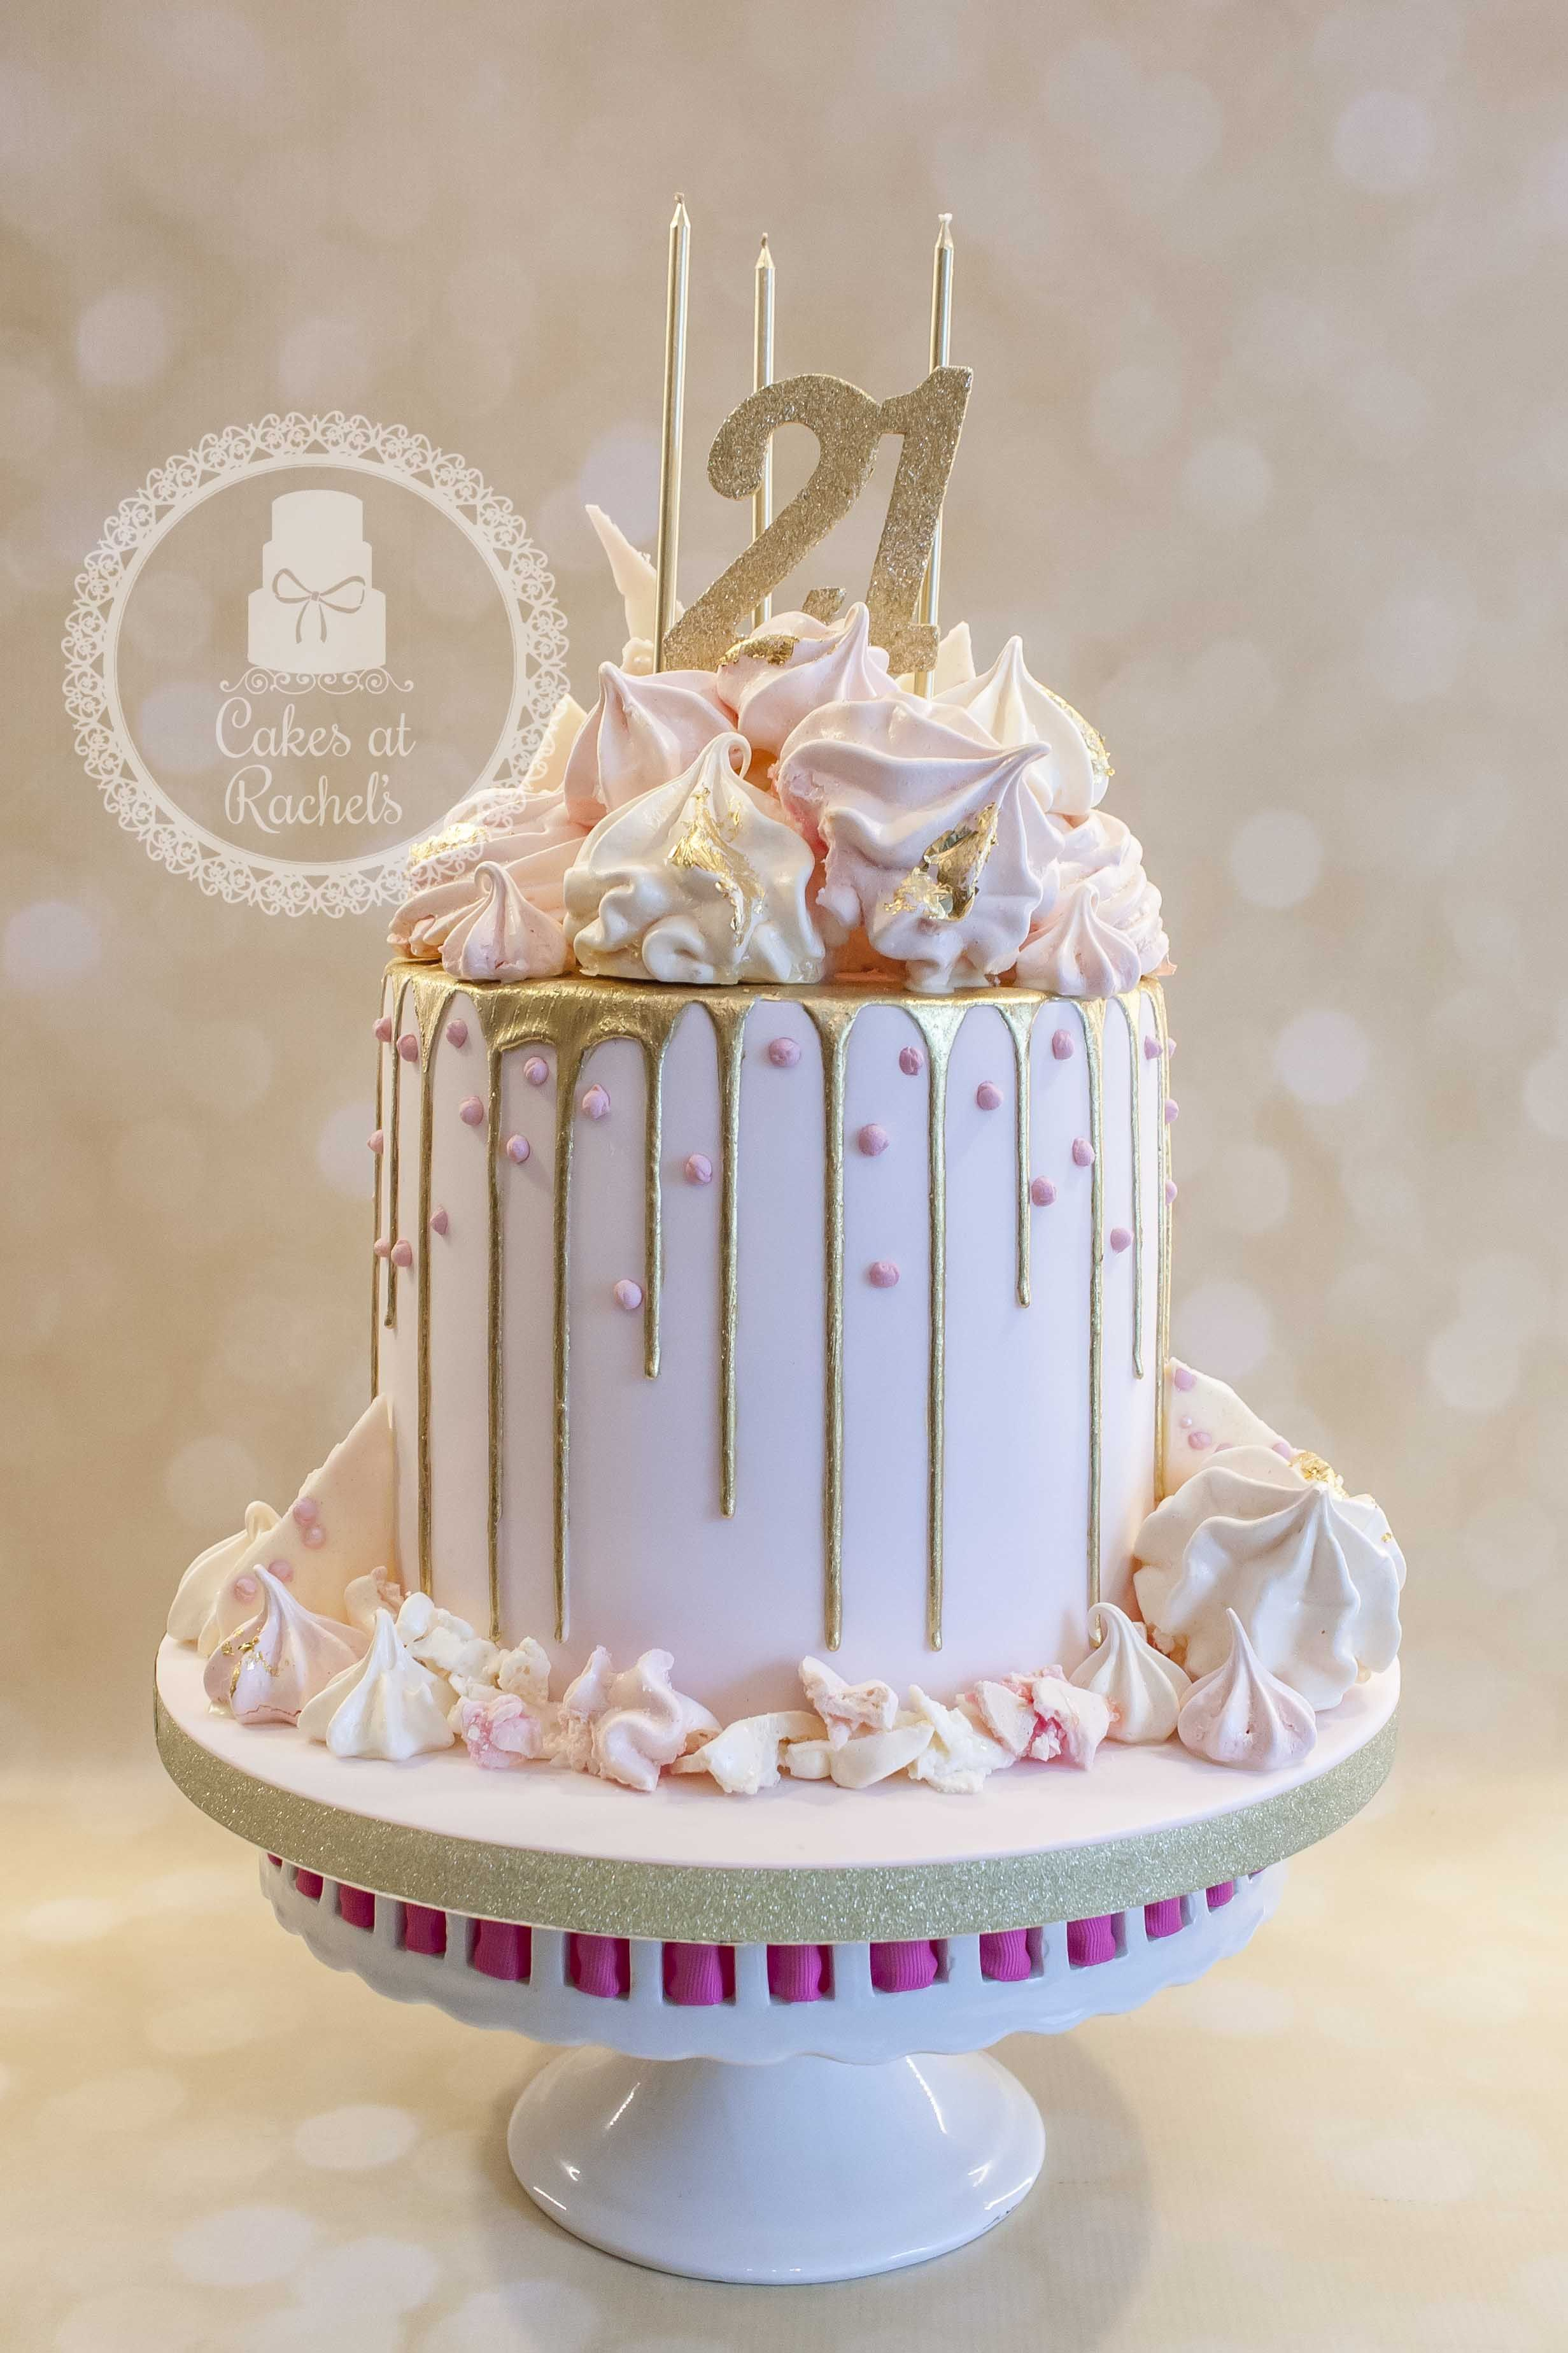 21St Birthday Cake Pastel Pink And Gold Drip Cake For Francescas 21st Birthday Cake